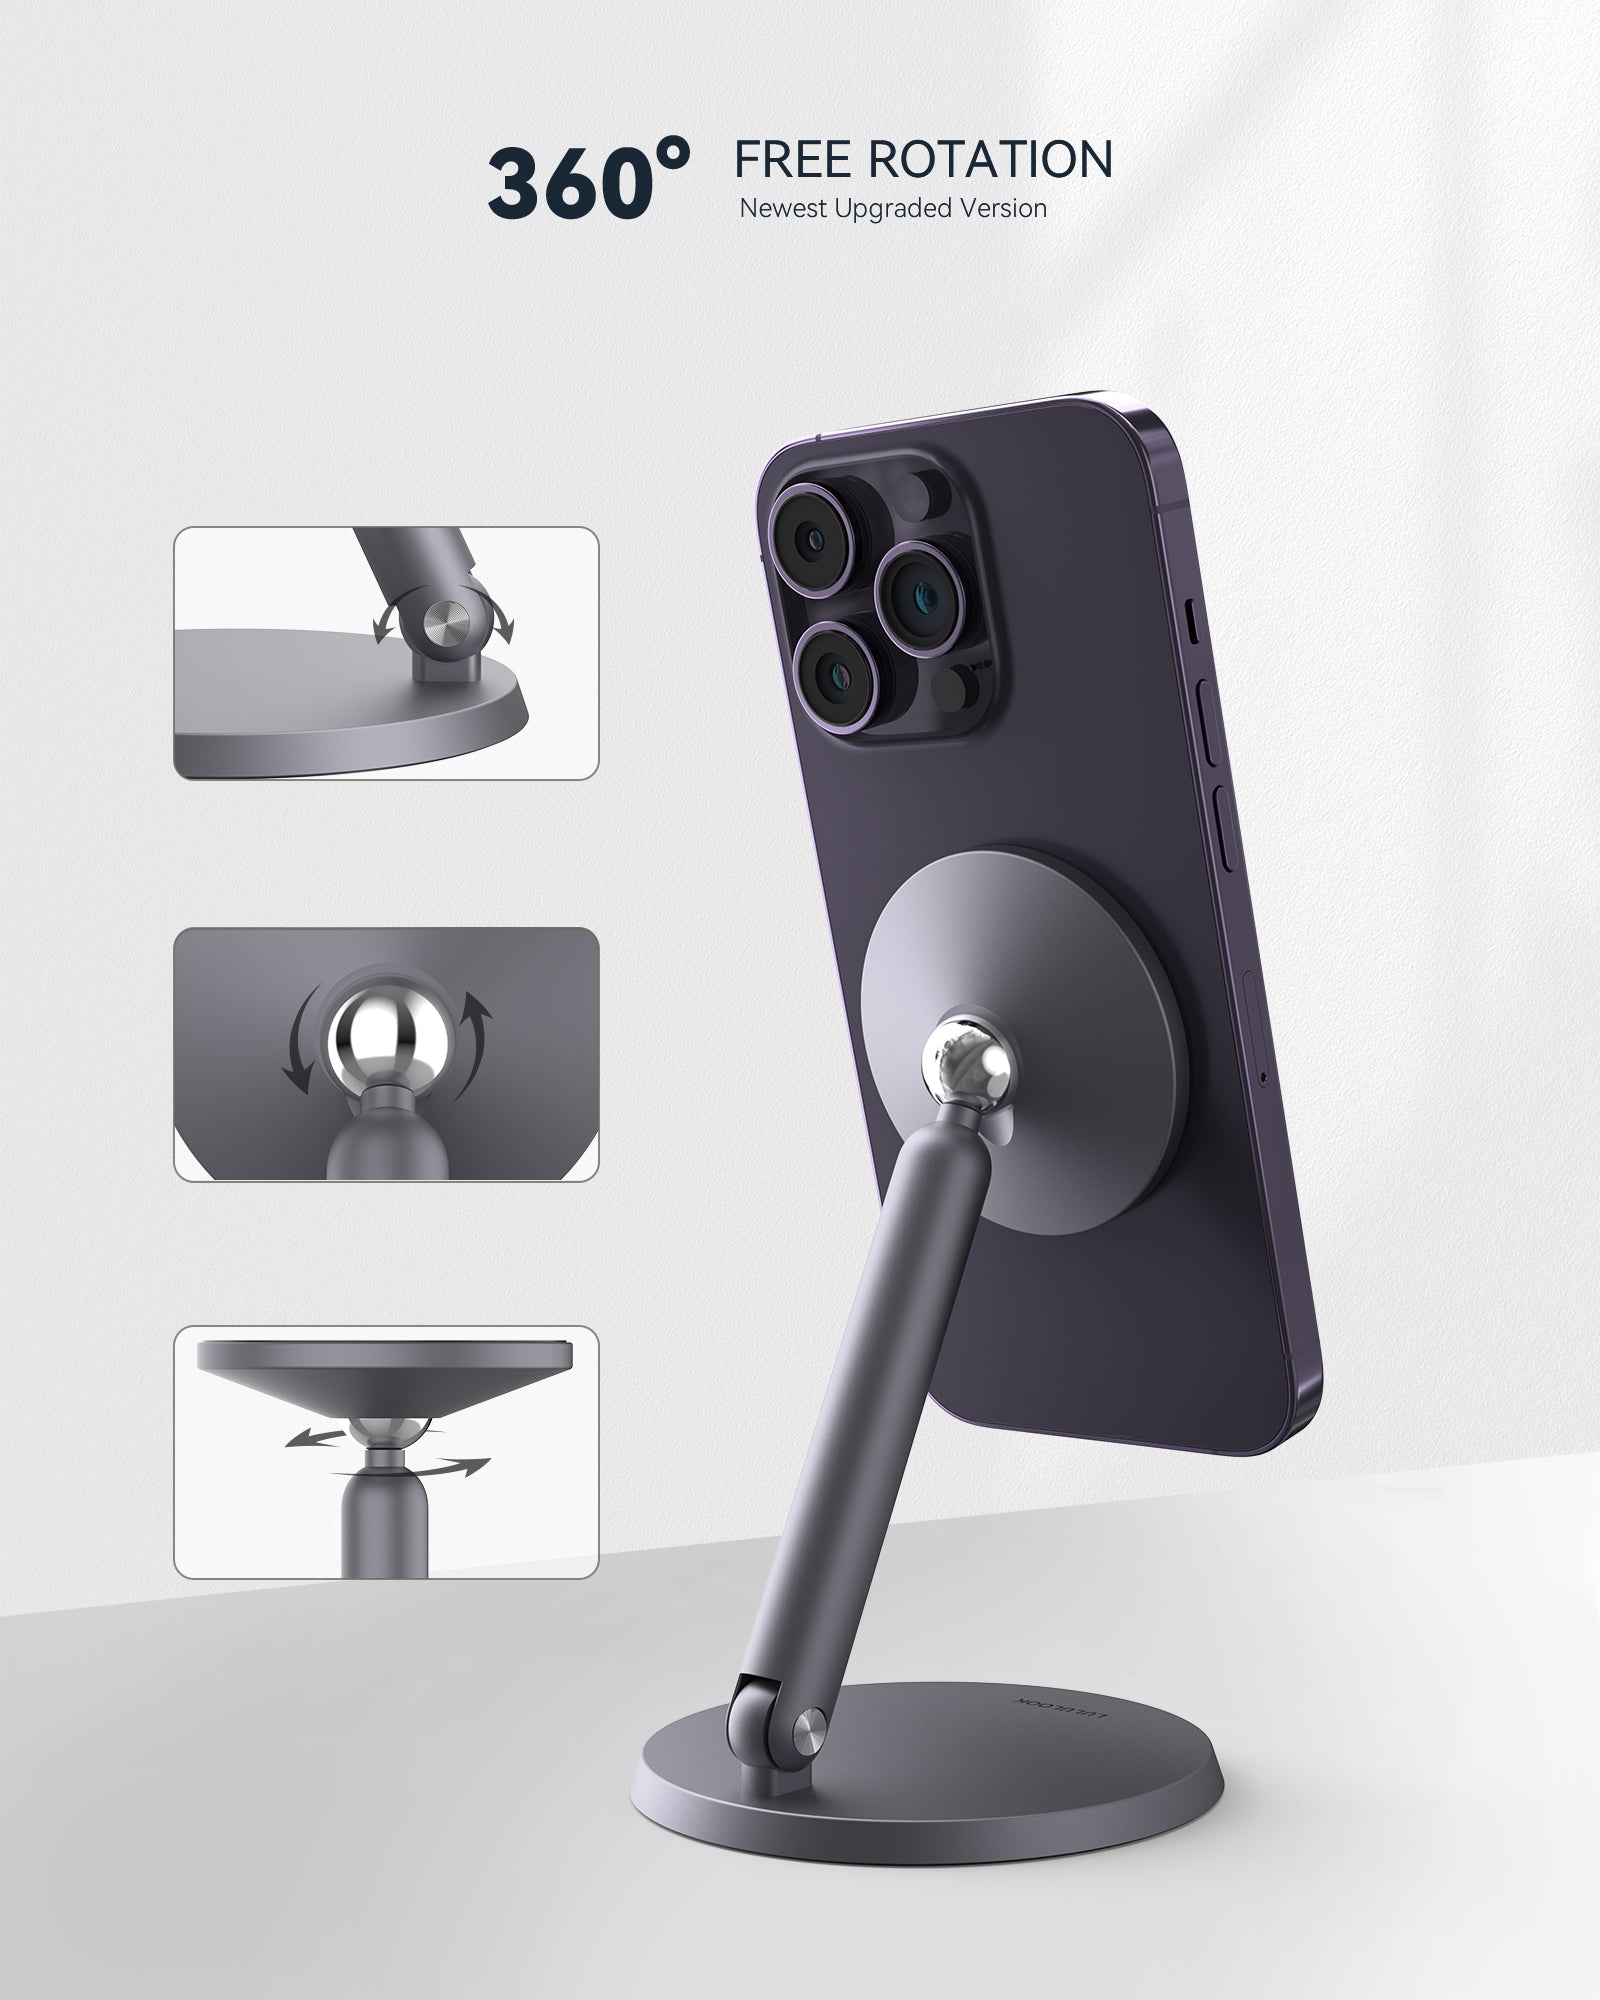 Lululook Magnetic Stand for iPhone 15 Pro Max, 14, 13 and iPhone 12 Pro,  Mini - Lululook Official